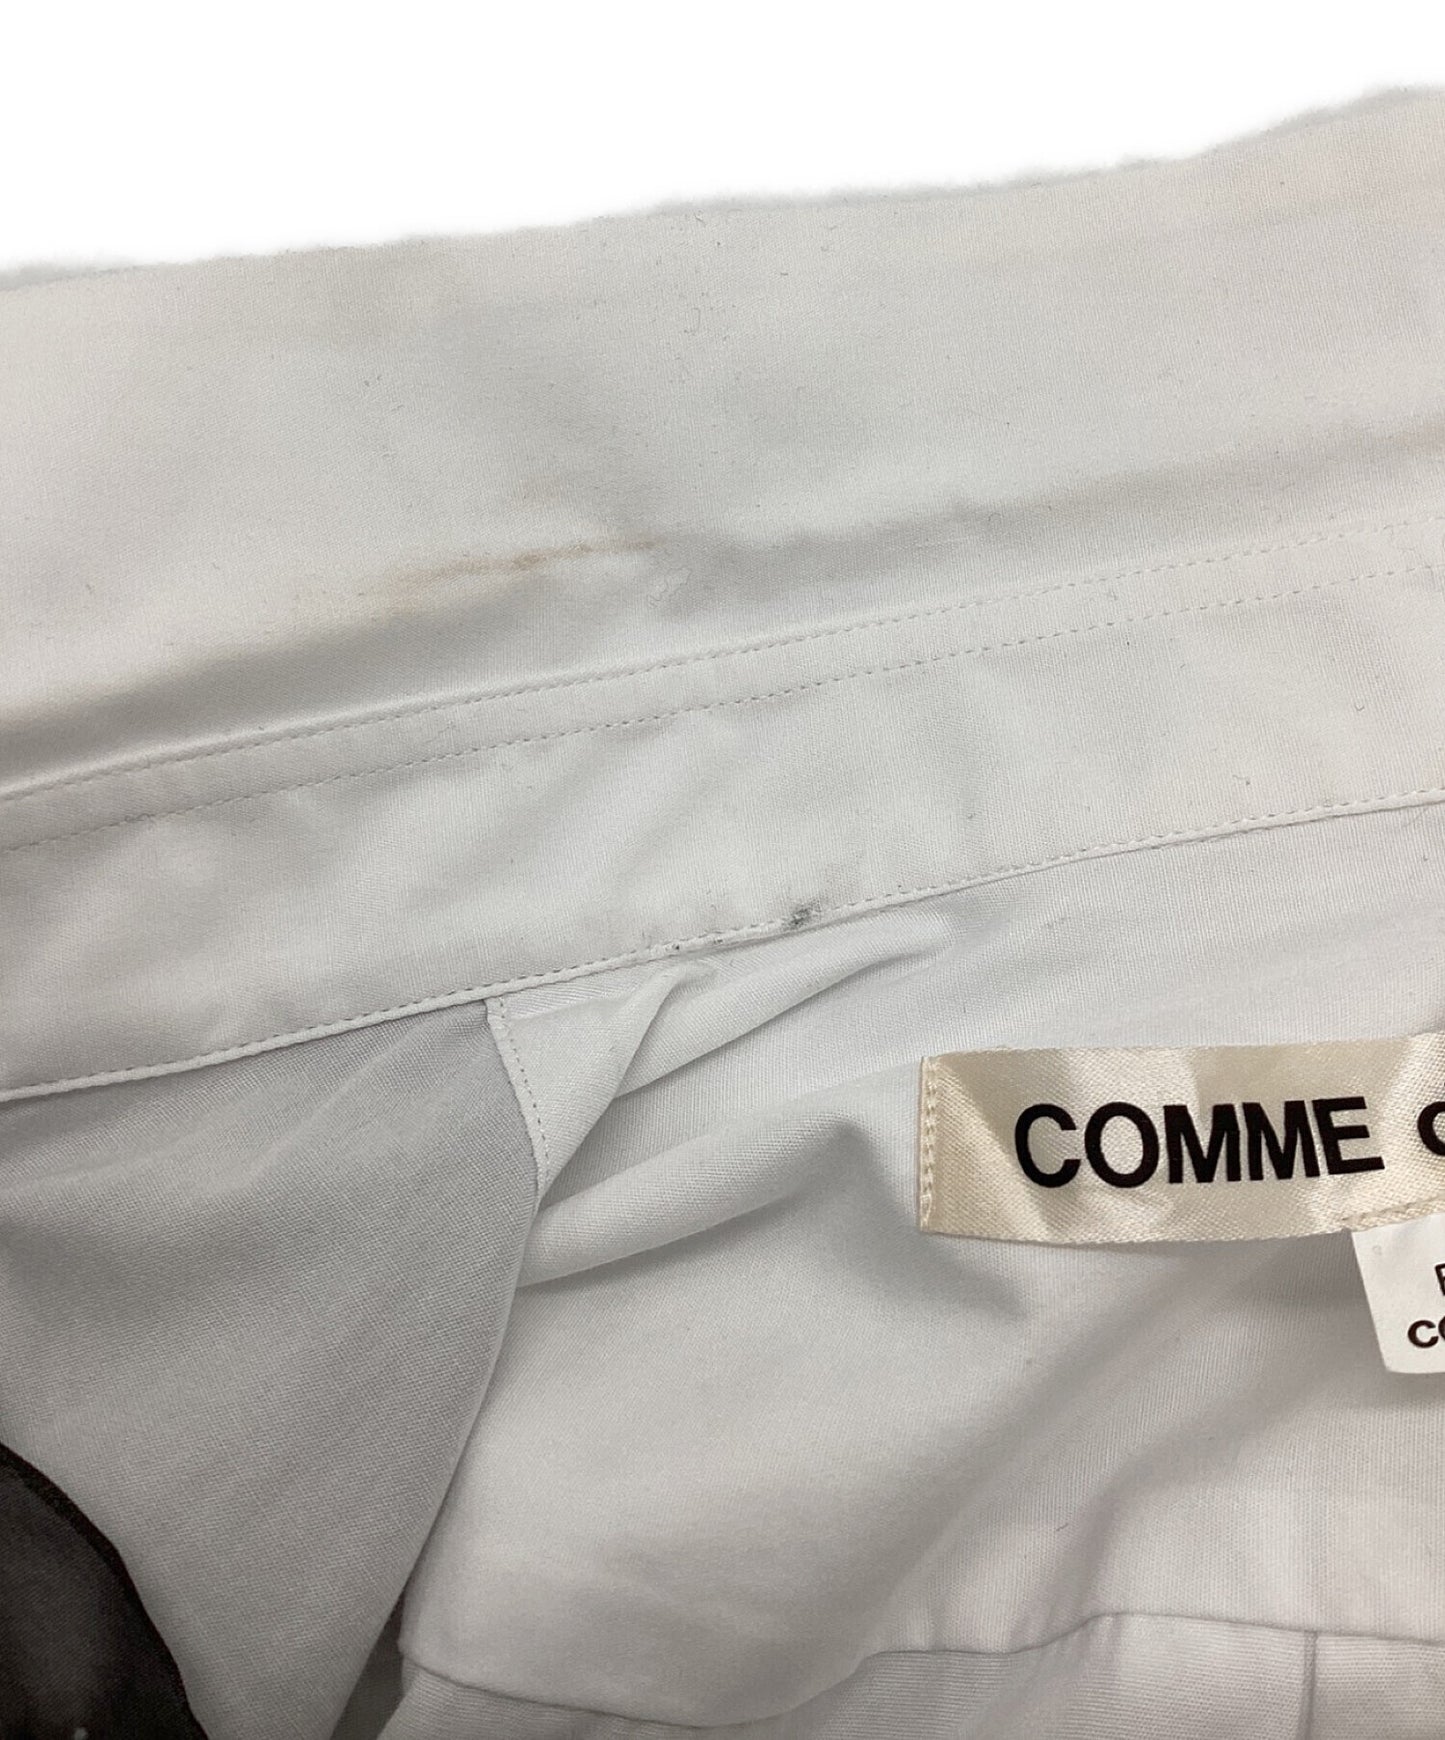 Comme des Garcons Organdy-Switched襯衫GD-B010